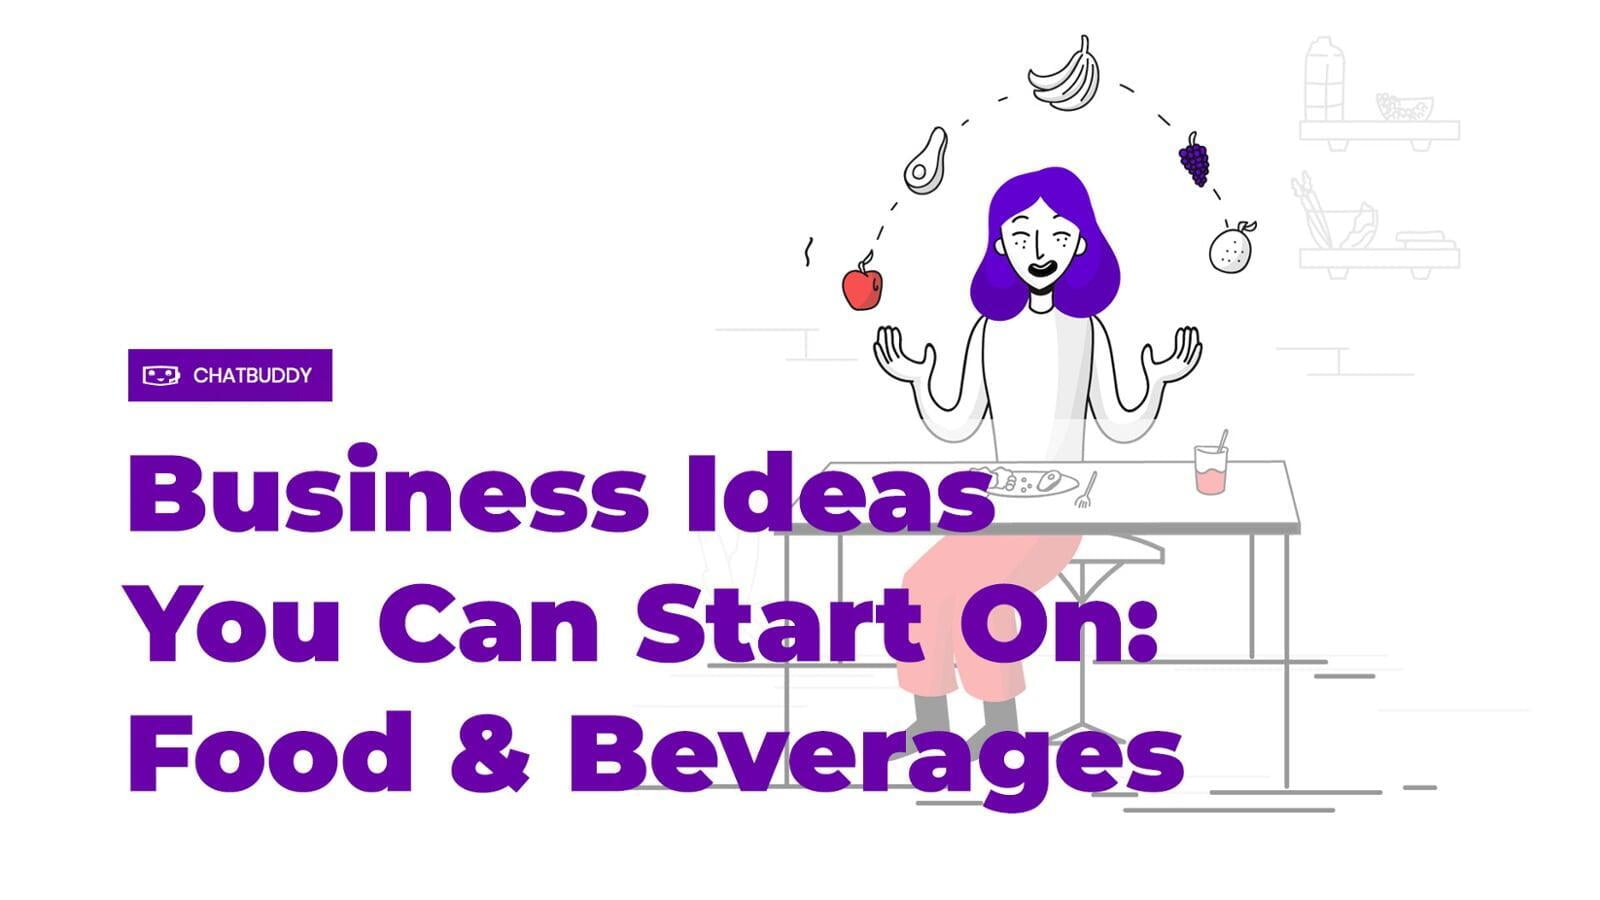 Business Ideas You Can Start On: Food & Beverages